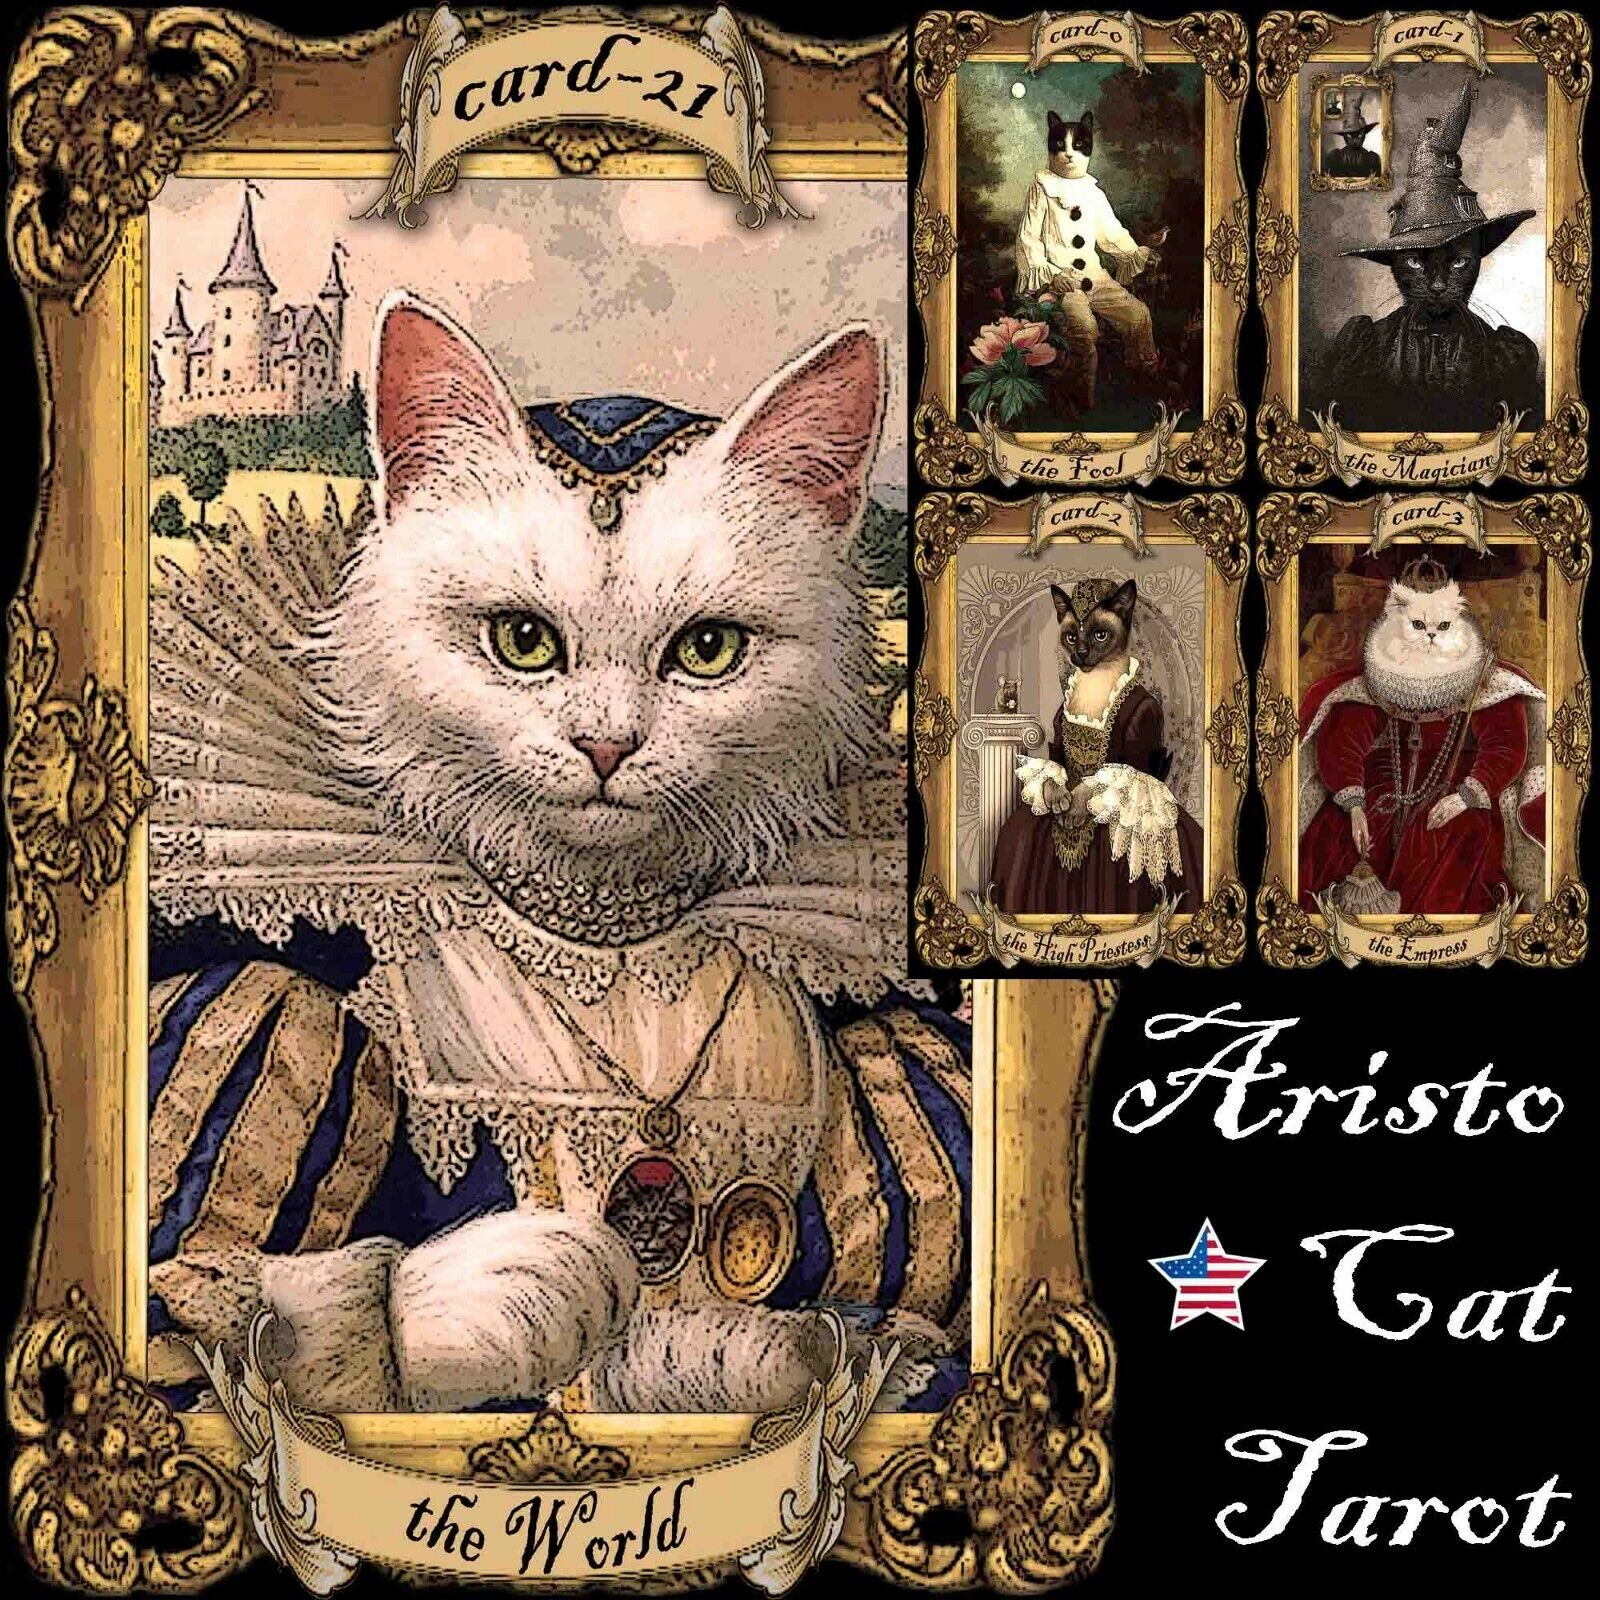 cat tarot card cards deck fortune telling rare vintage oracle cats supplies gift